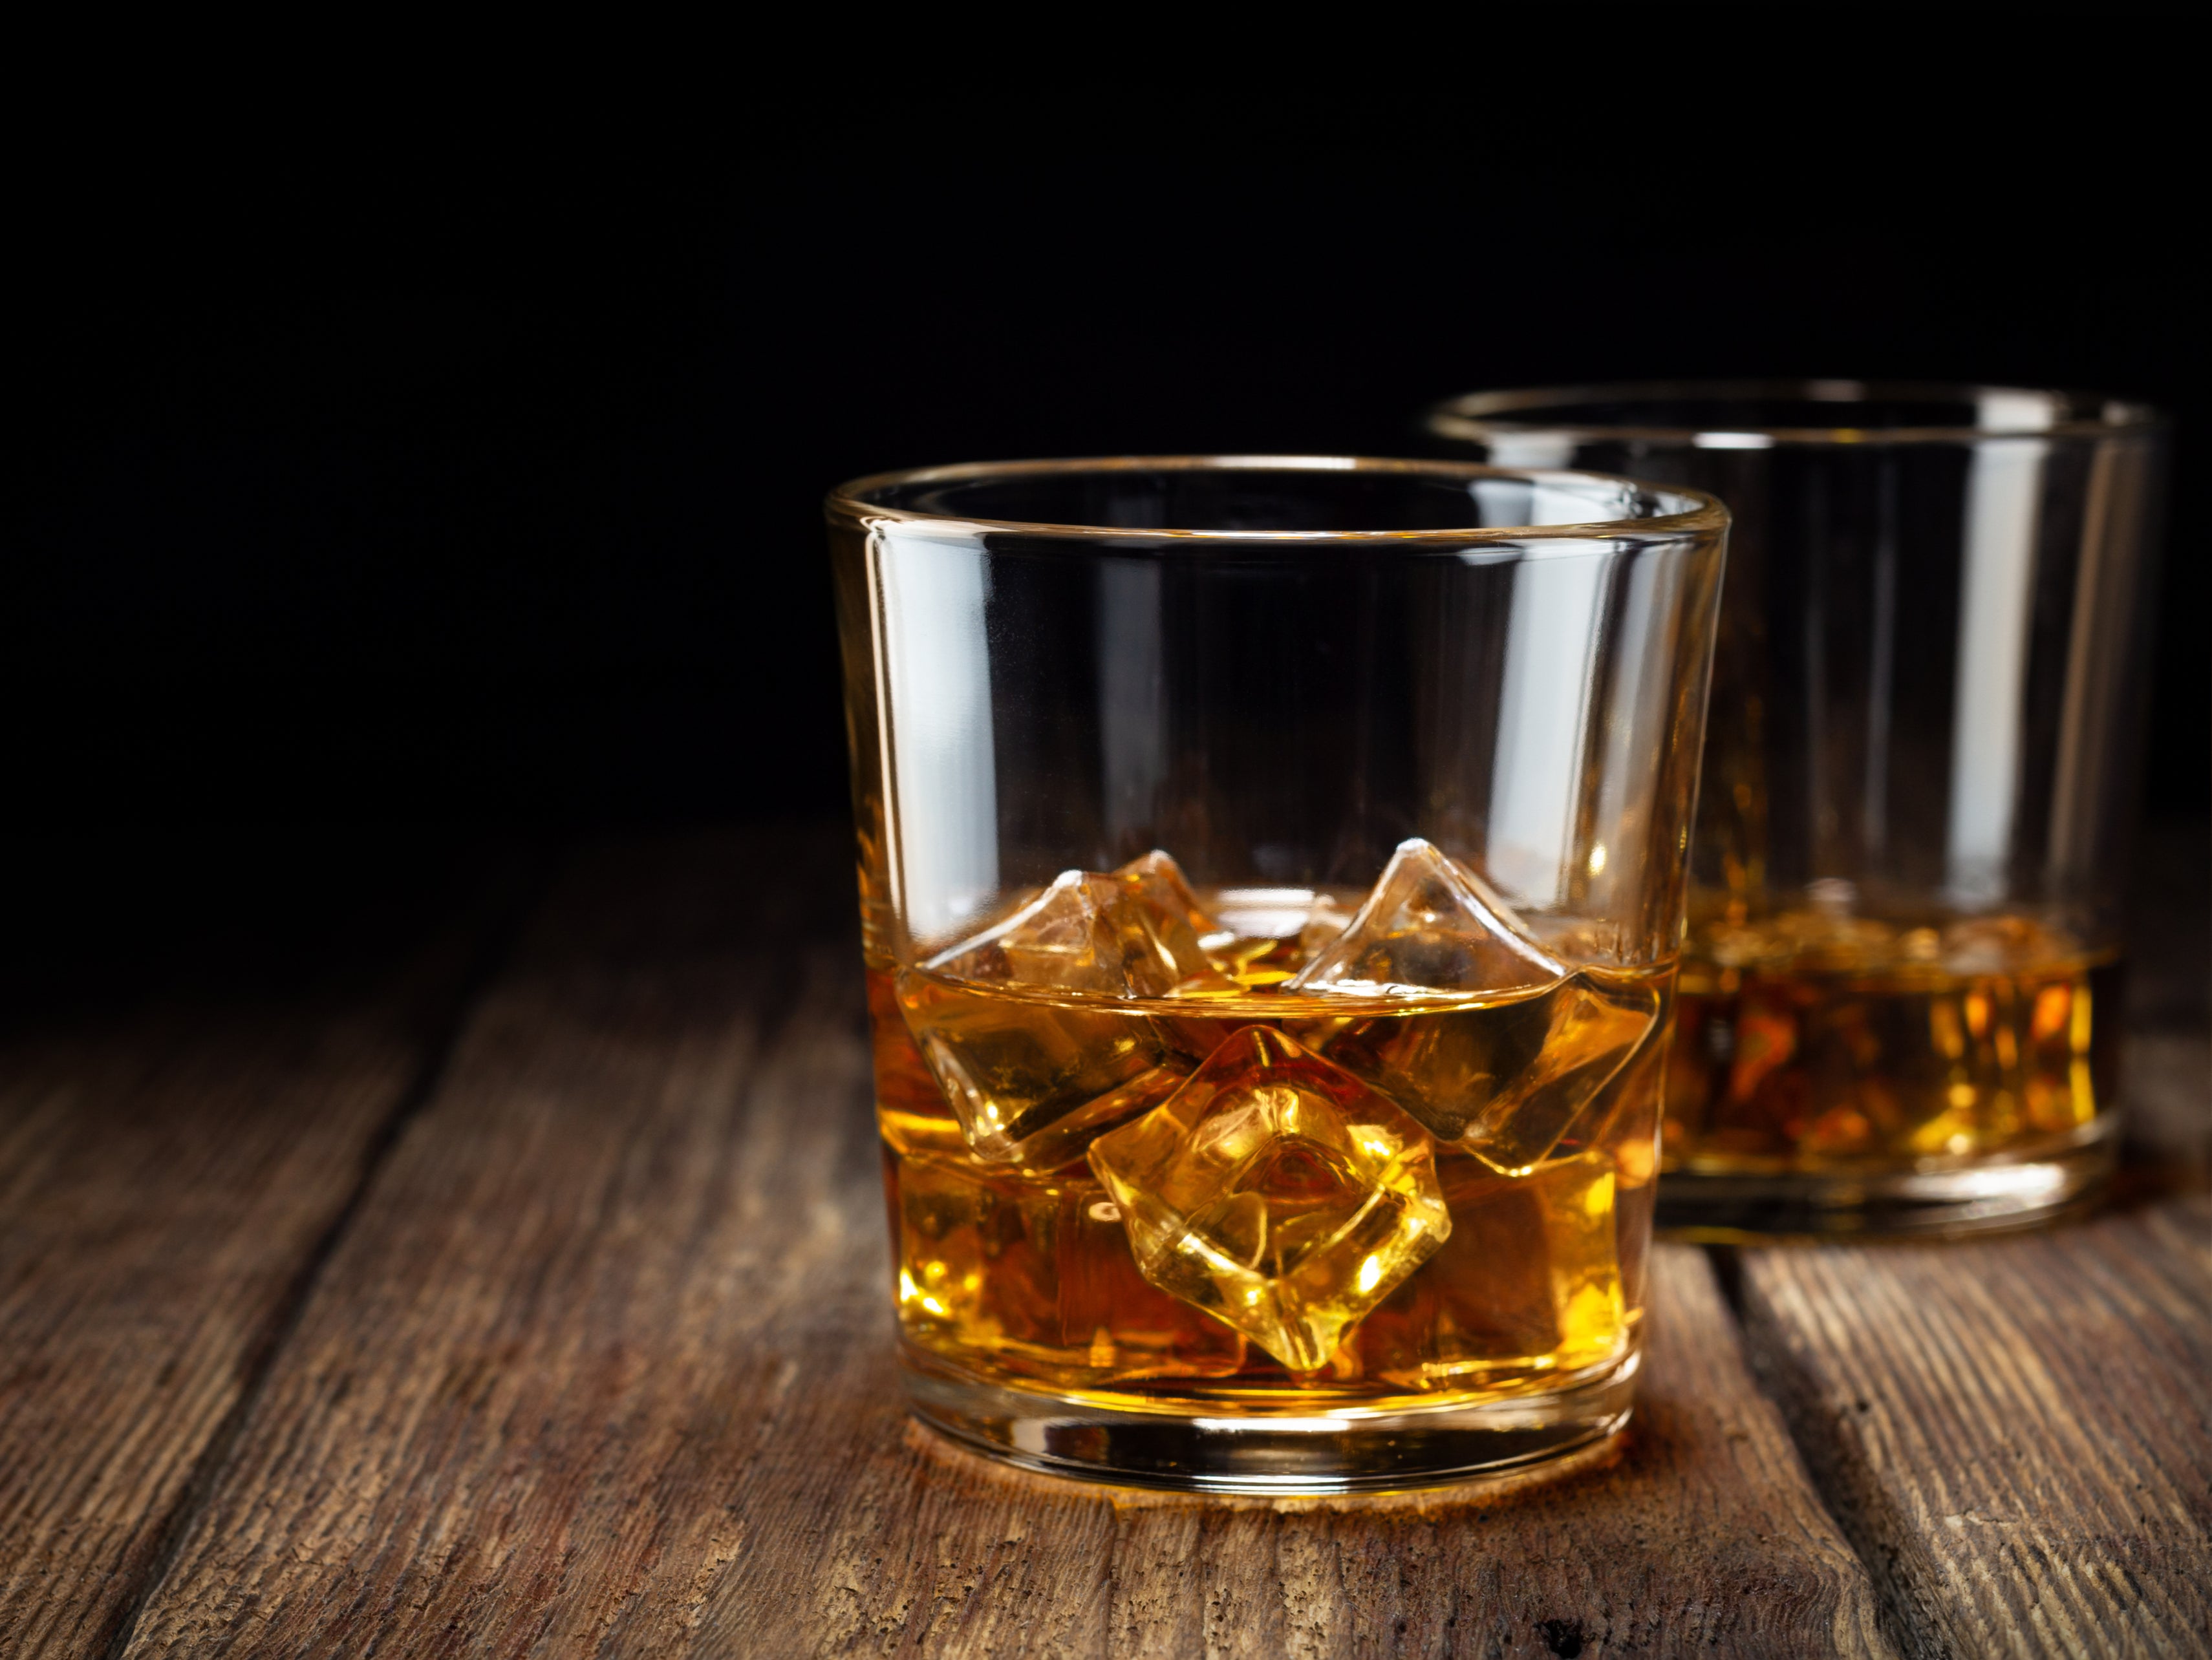 Tariffs on Scotch whisky will be removed if the US-UK mini-trade deal goes ahead